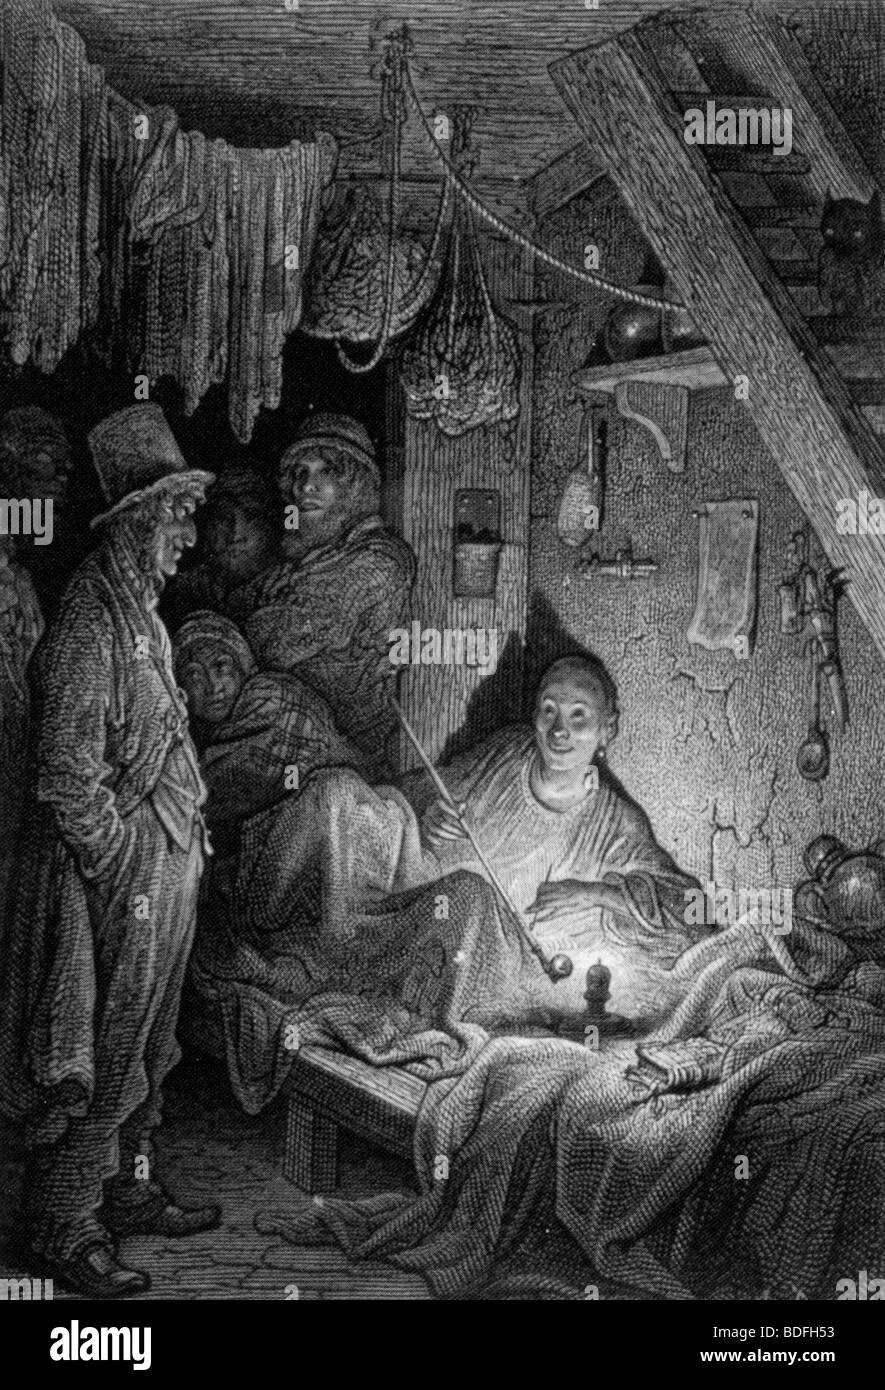 OPIUM SMOKING drawn by Gustave Dore in 1872 for an edition of The Mystery of Edwin Drood by Charles Dickens Stock Photo